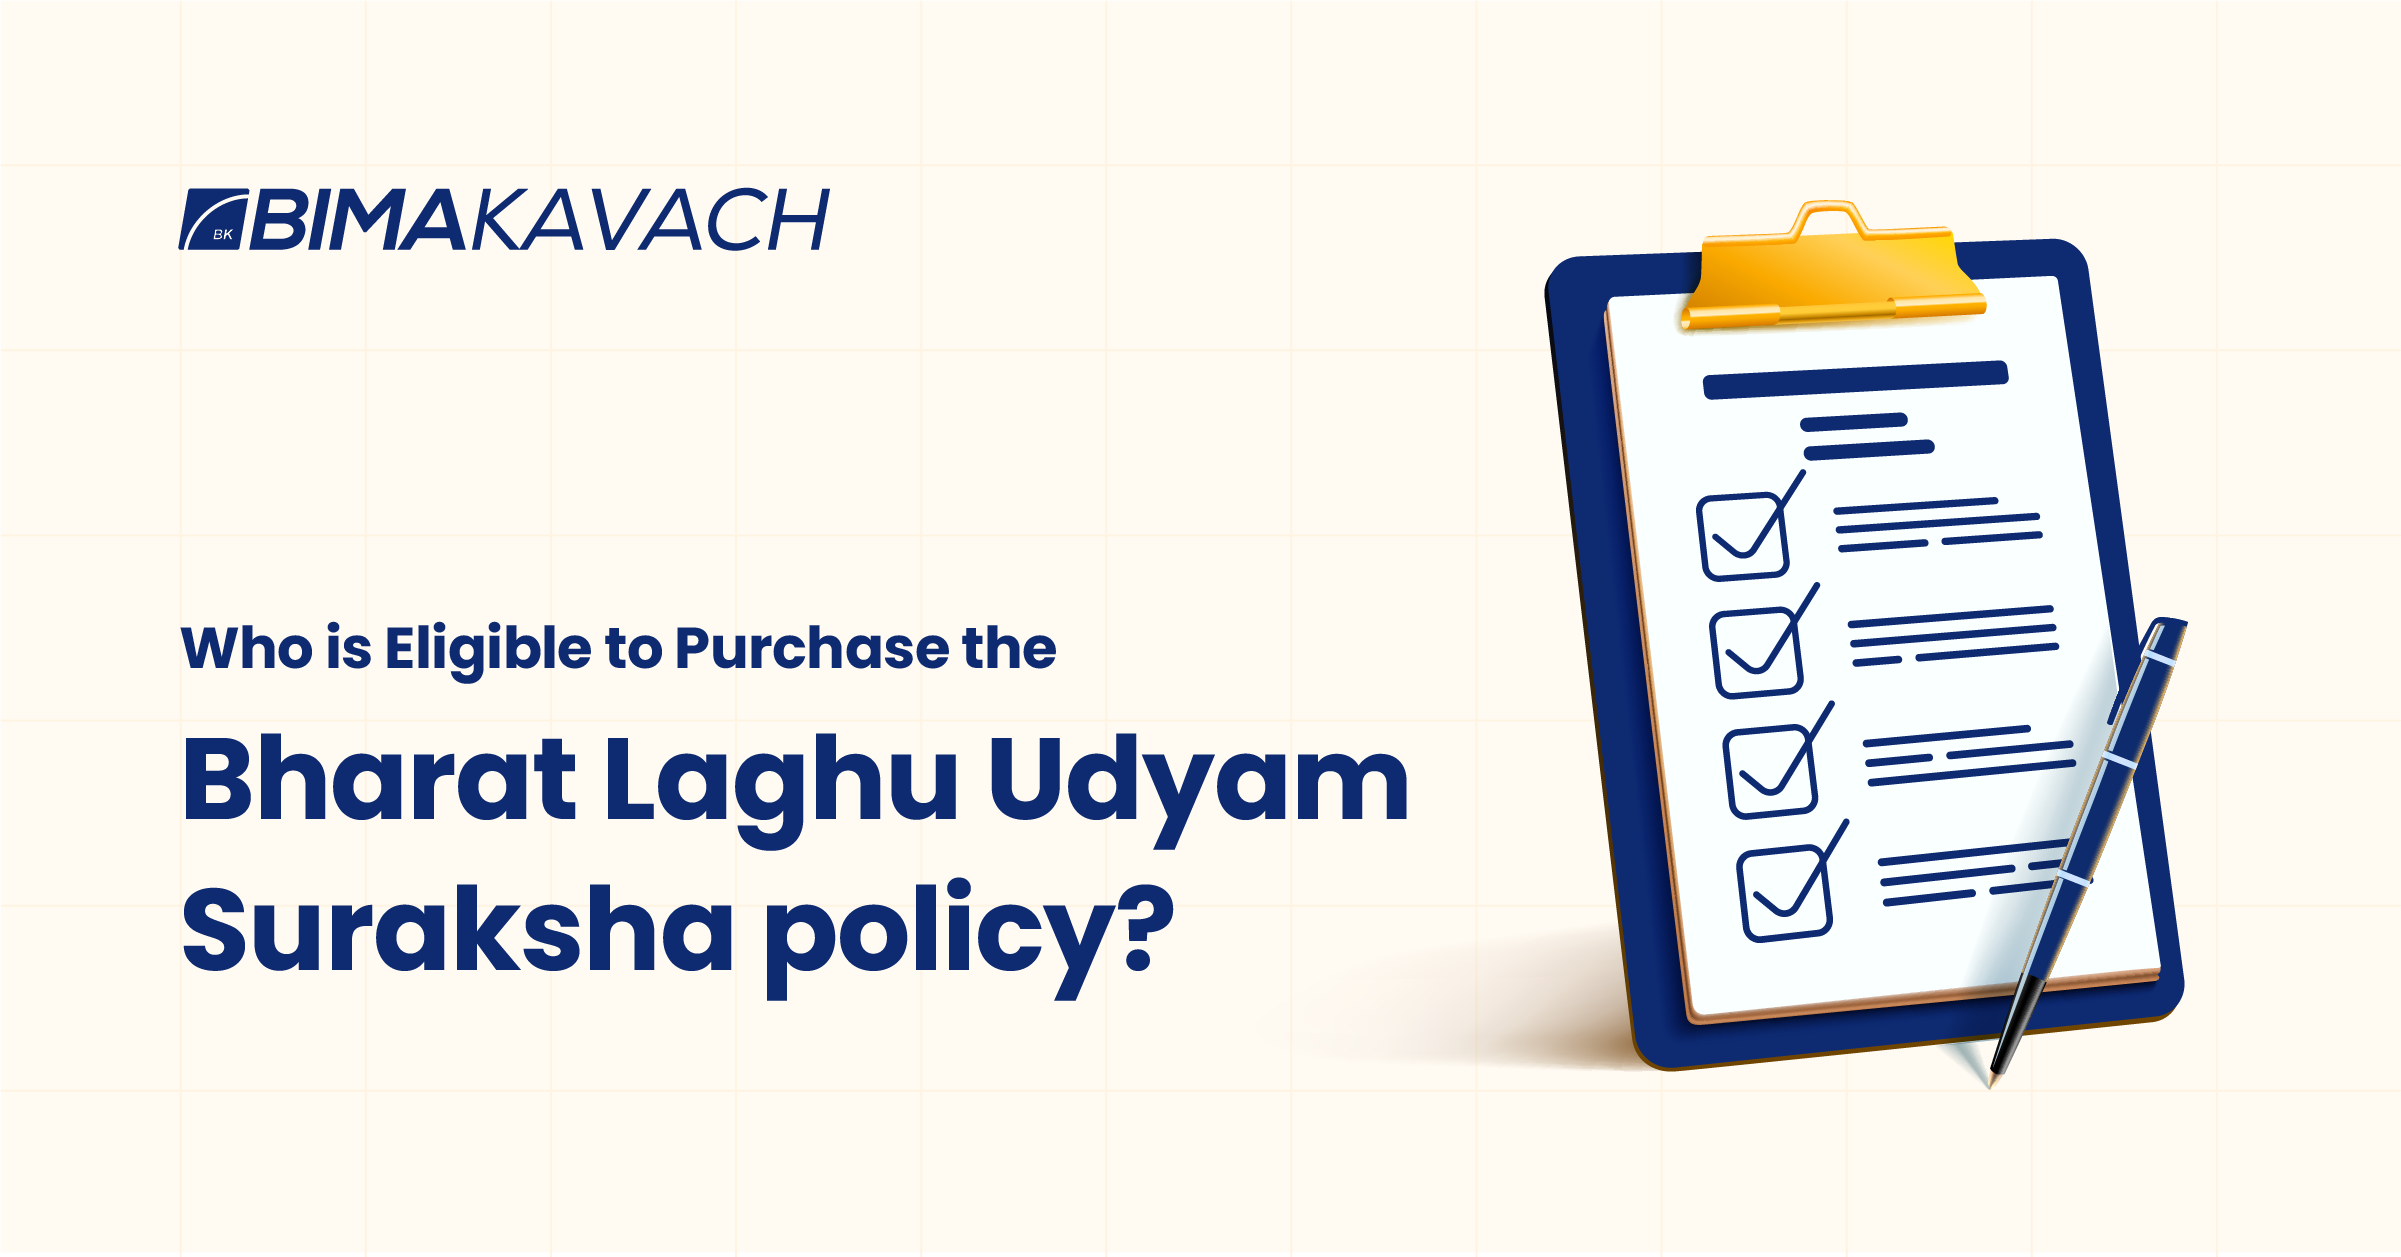 Who is Eligible to Purchase the Bharat Laghu Udyam Suraksha Policy?